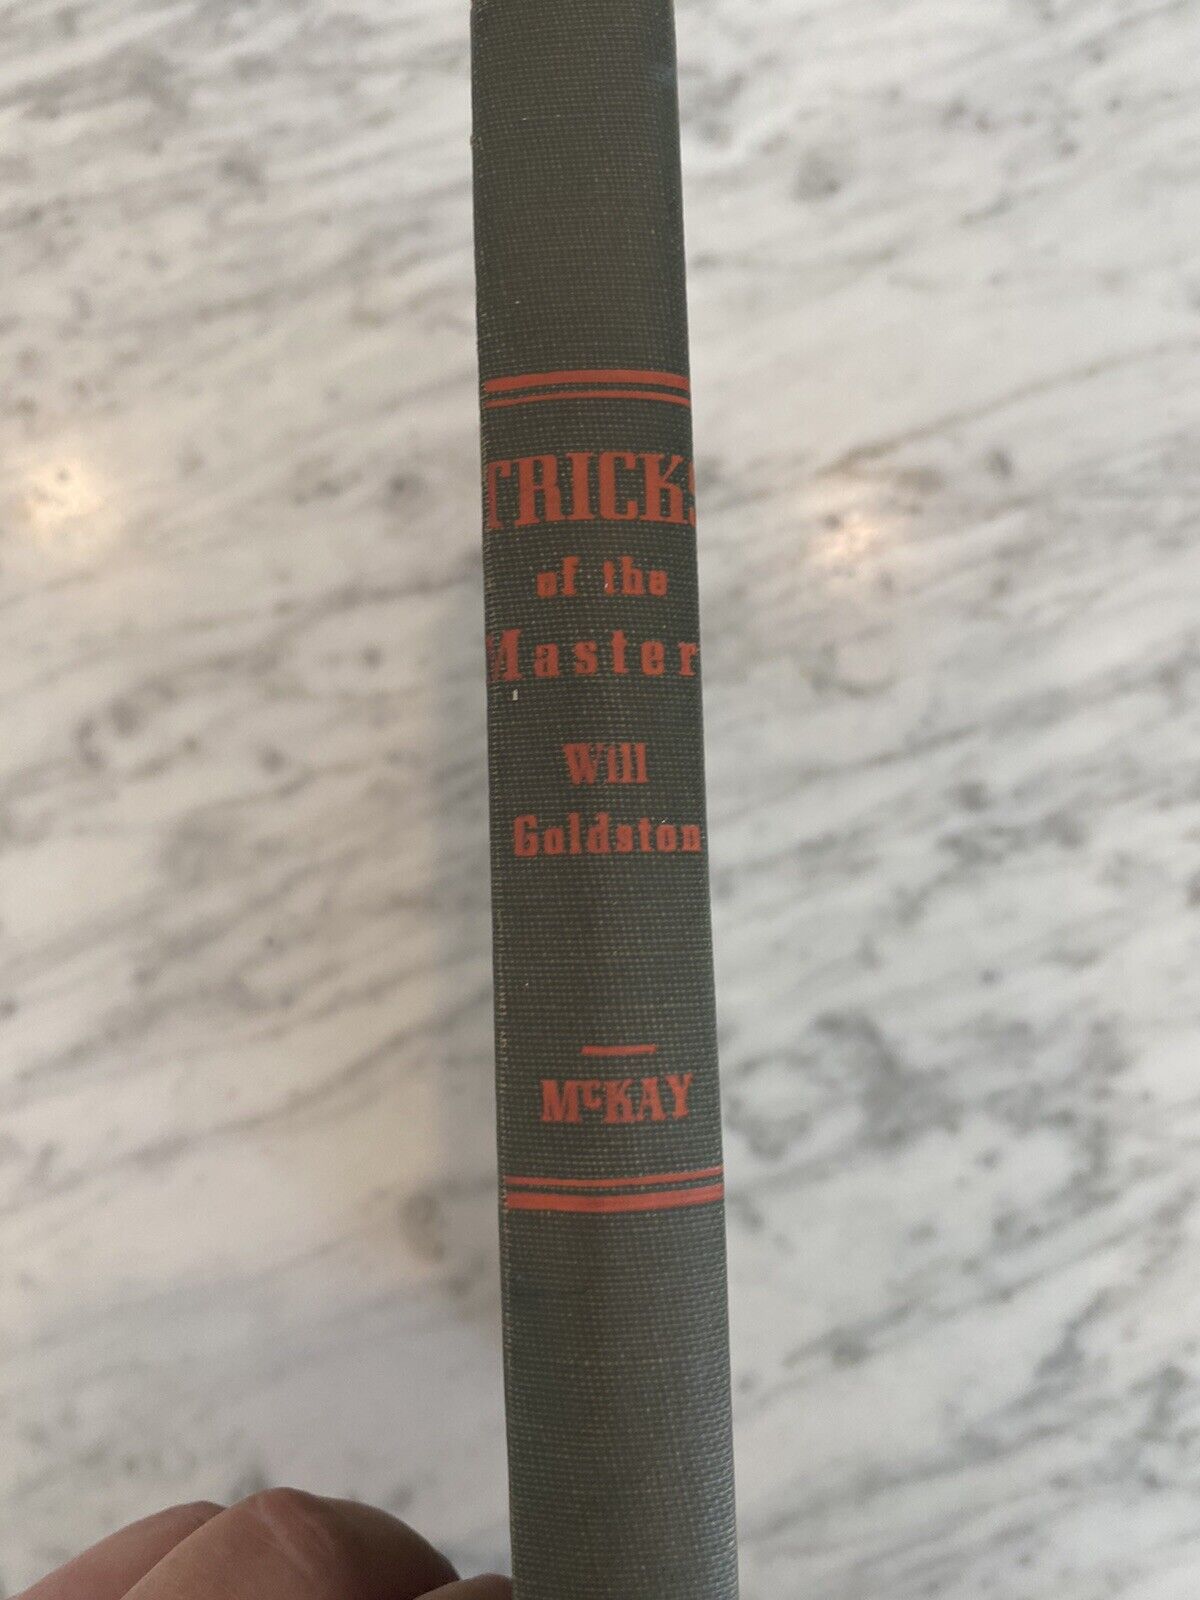 1942 TRICKS OF THE MASTERS BY WILL GOLDSTON Magic Tricks First Edition 1942